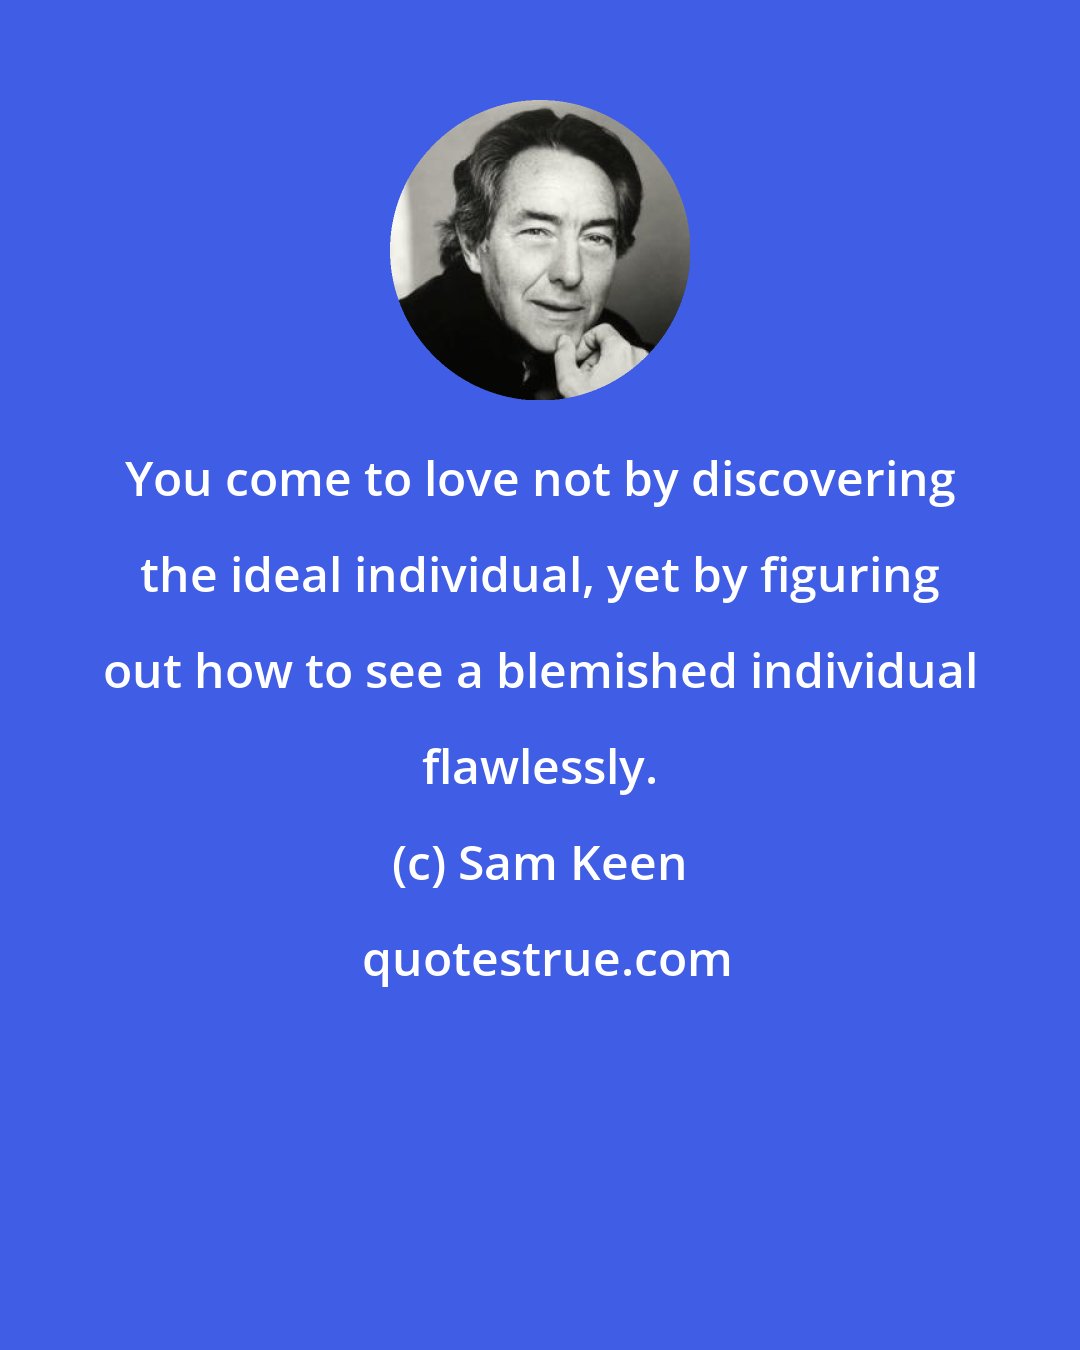 Sam Keen: You come to love not by discovering the ideal individual, yet by figuring out how to see a blemished individual flawlessly.